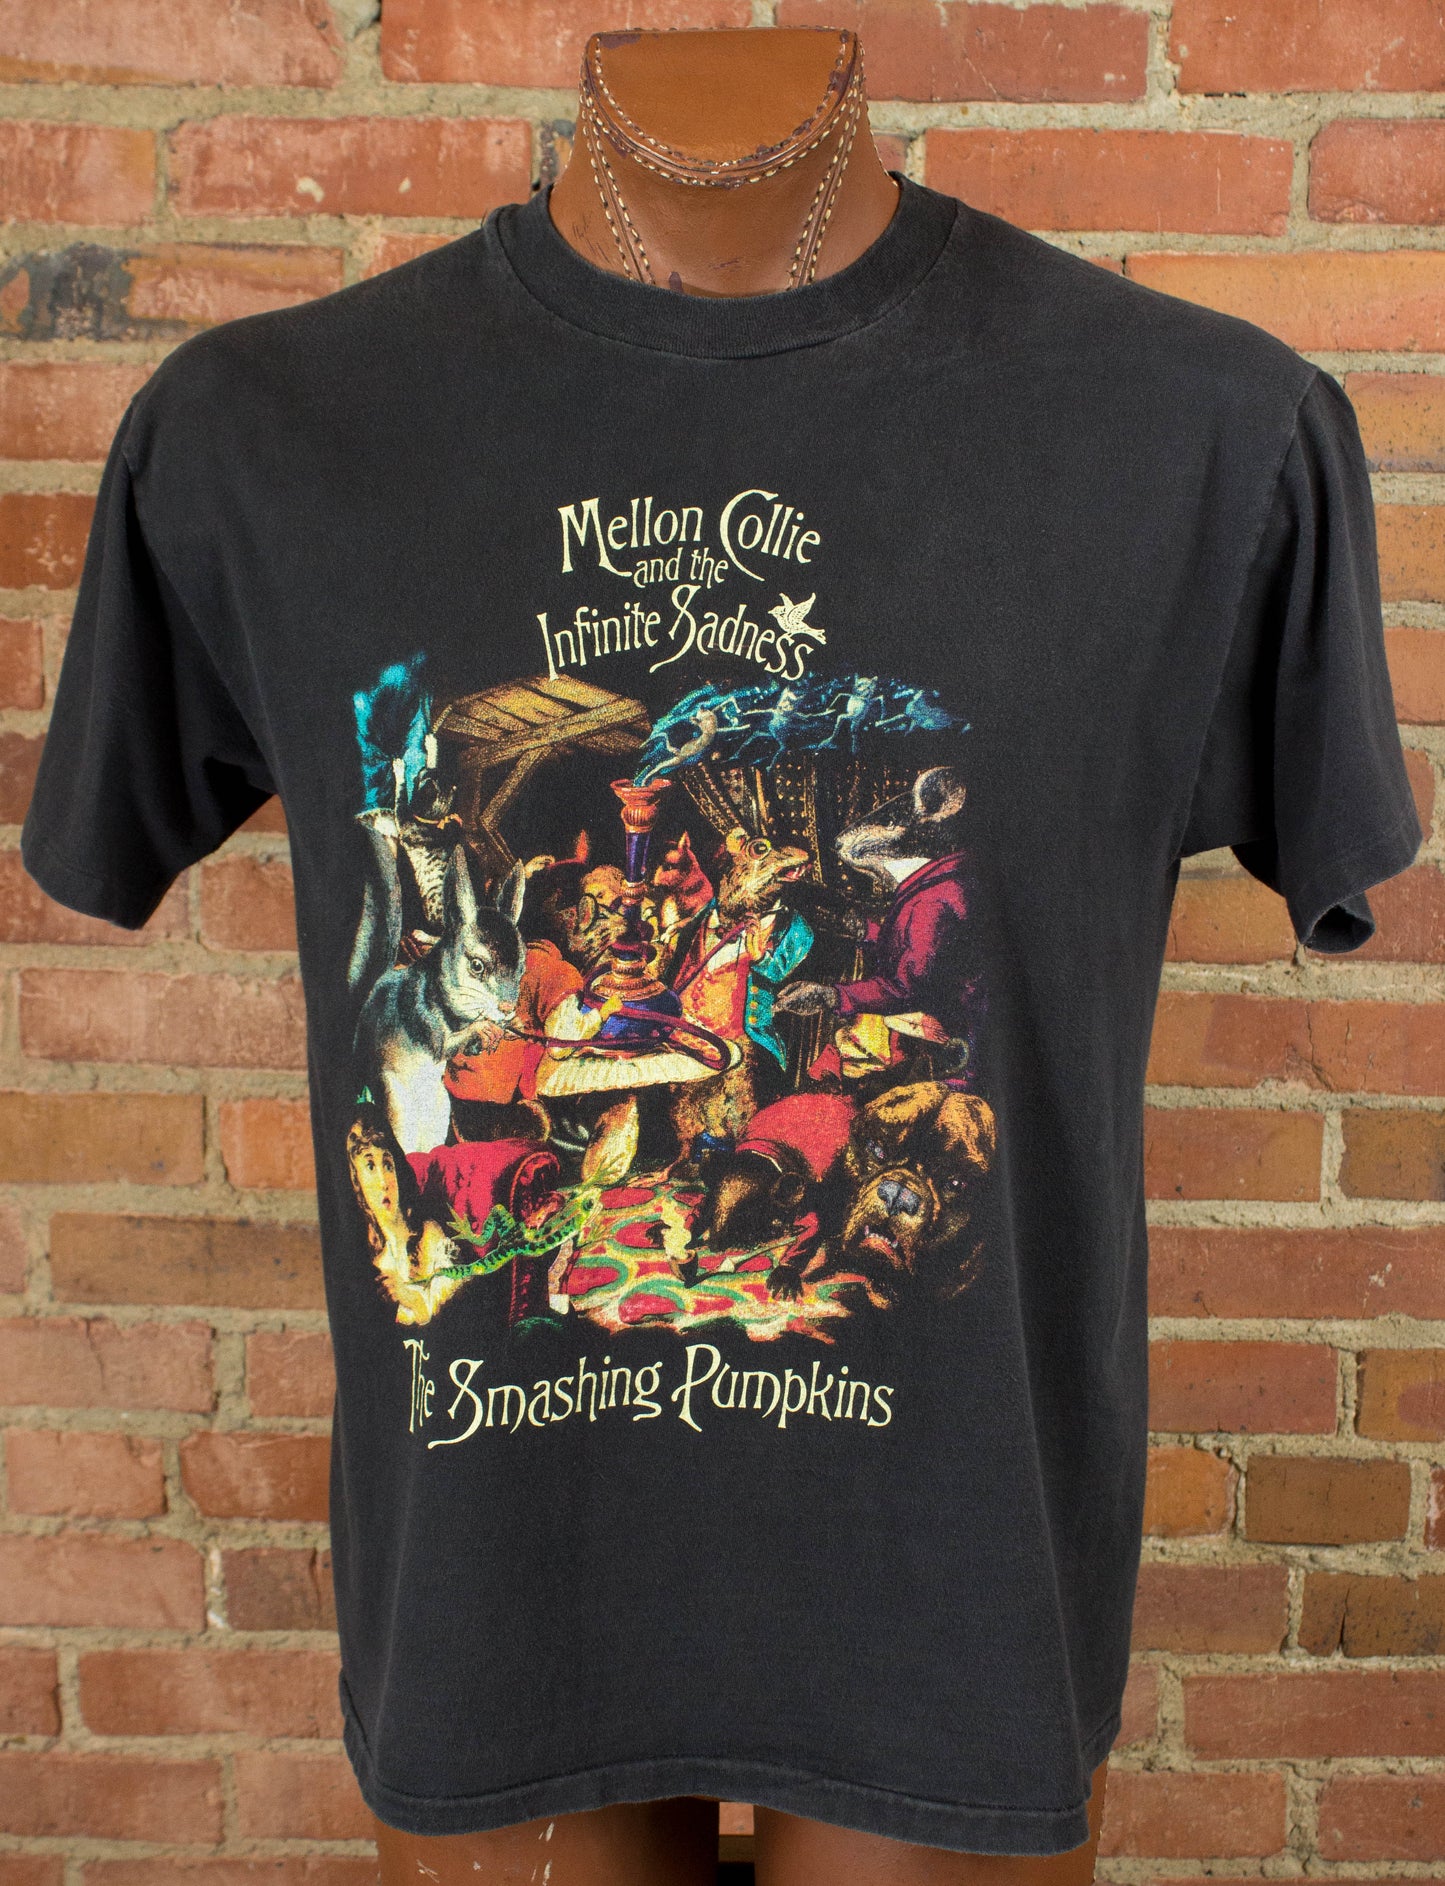 Vintage The Smashing Pumpkins 90s Mellon Collie and the Infinite Sadness Skull and Crossbones Black Concert T Shirt Unisex Large